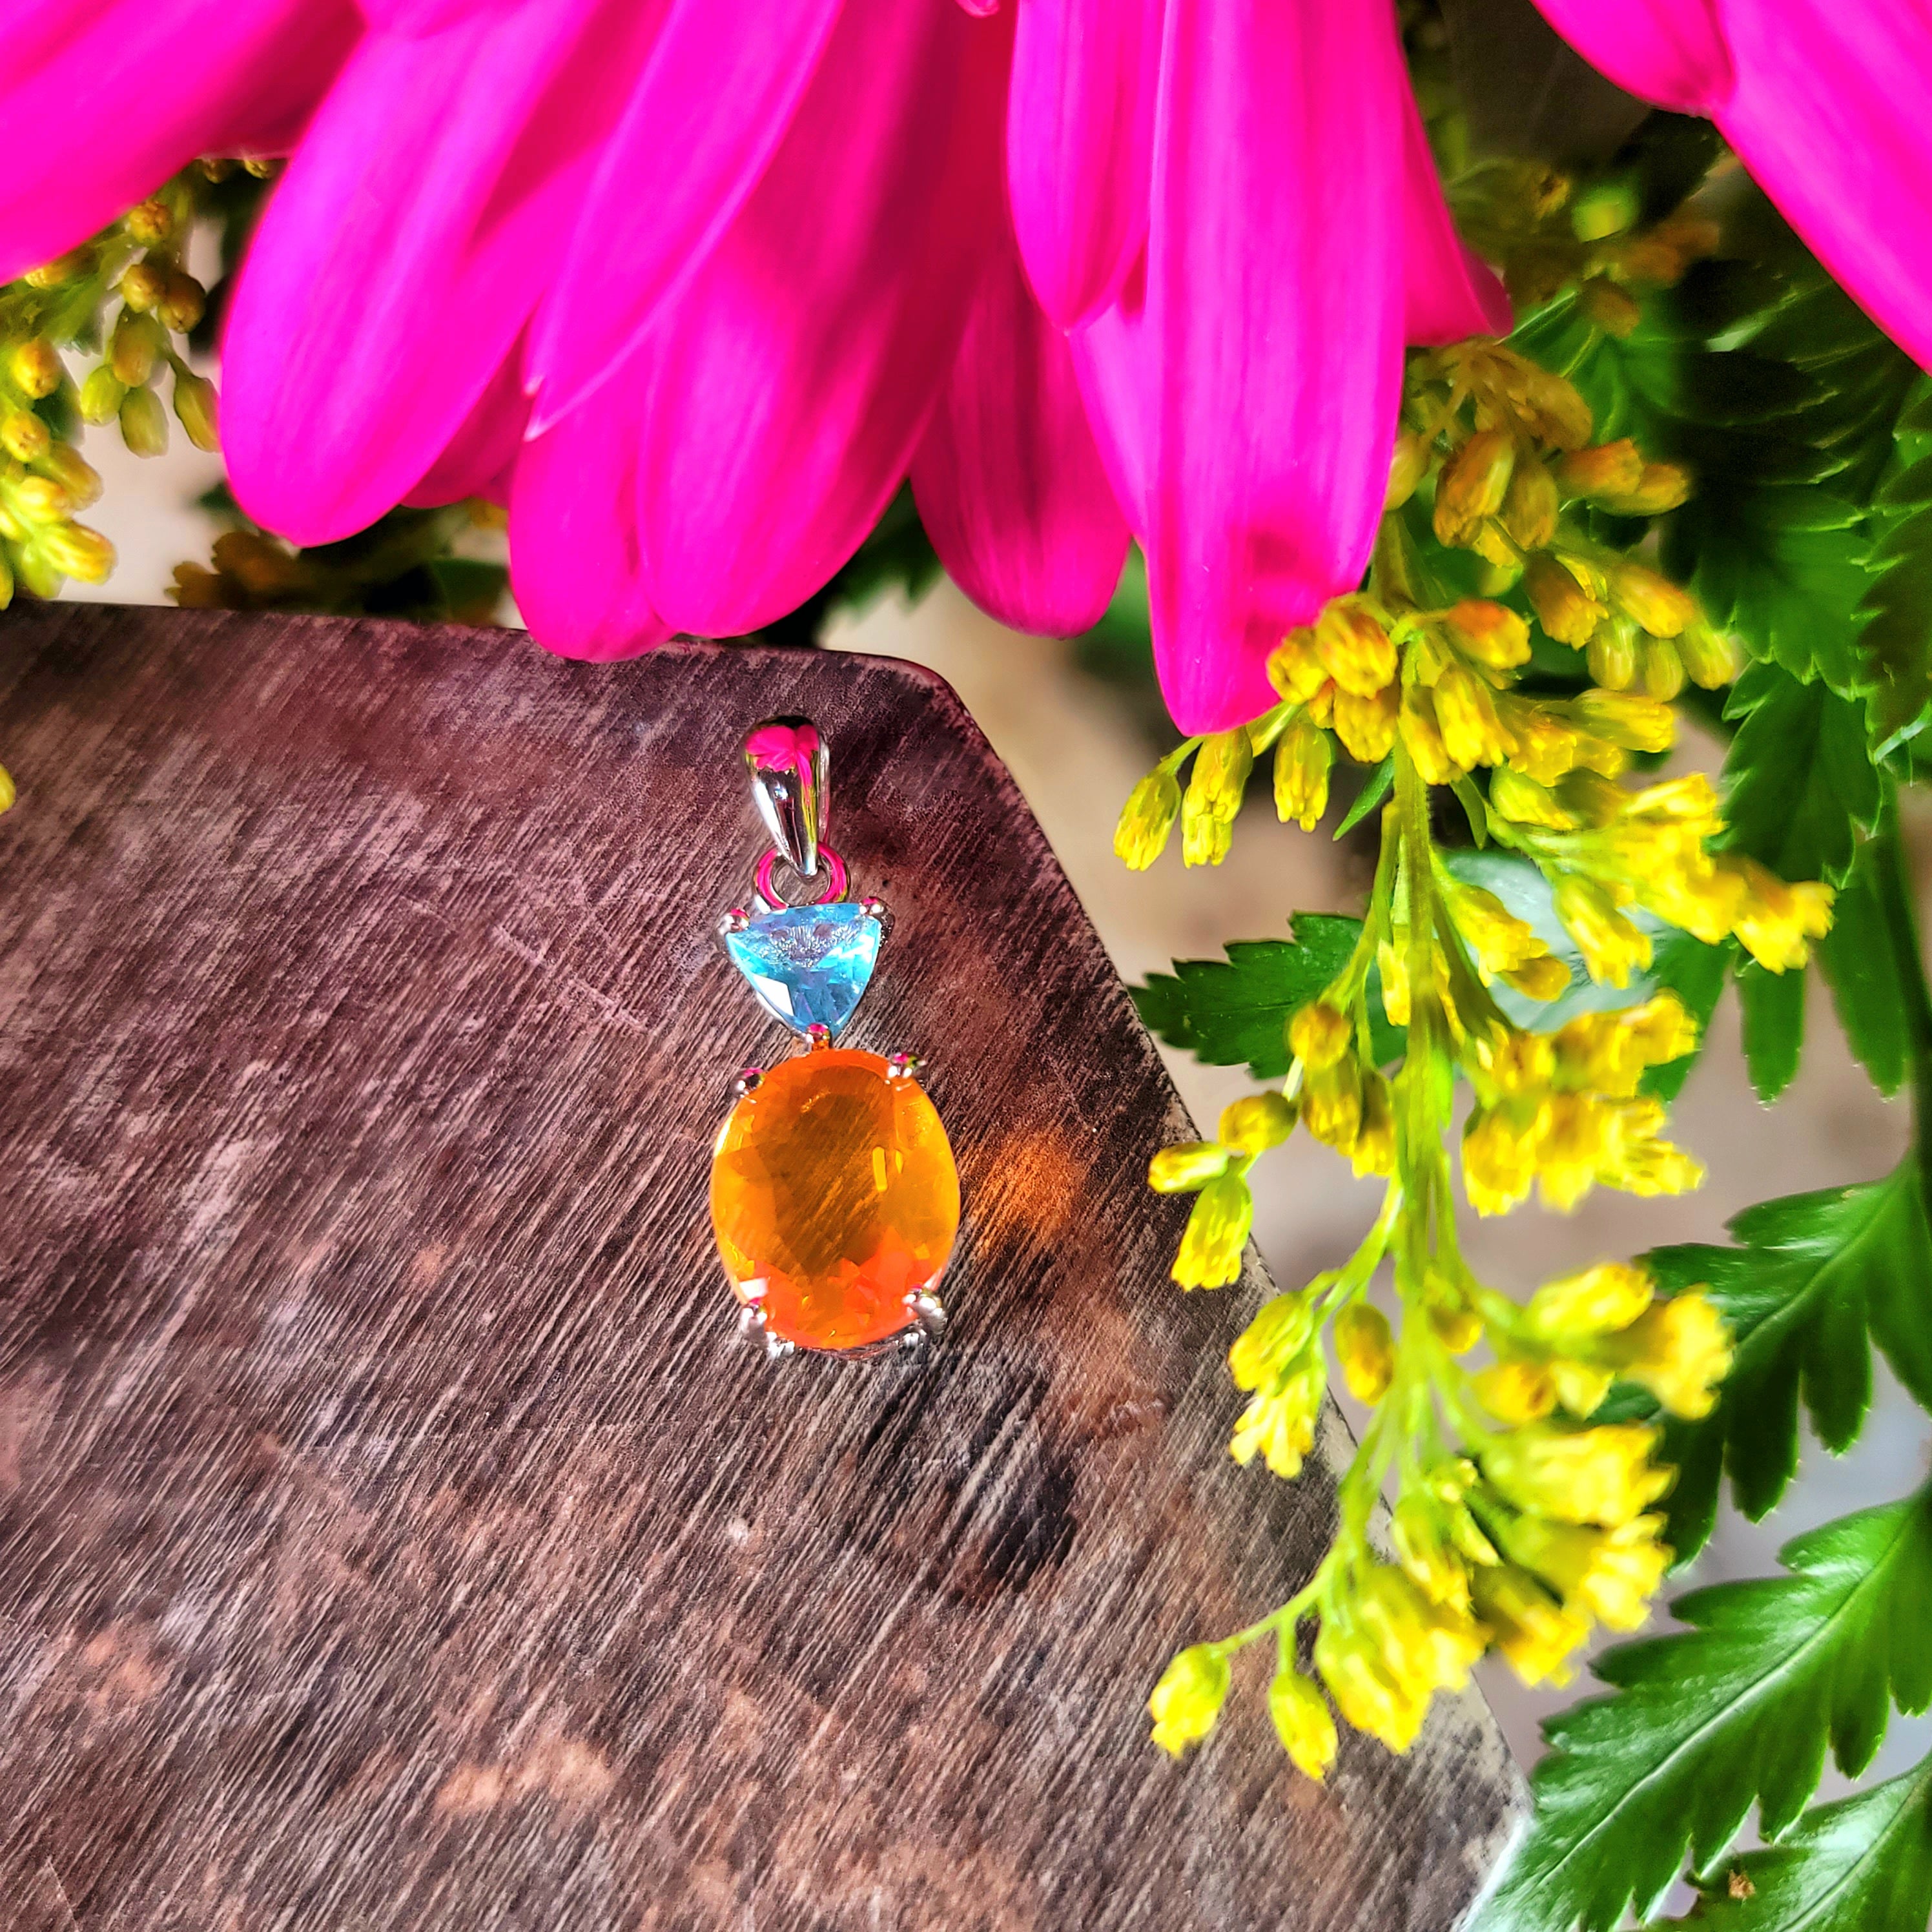 Paraiba Blue Apatite x Fire Opal Pendant .925 Silver for Intuitively Unlocking Intimacy, Passion & Pleasure